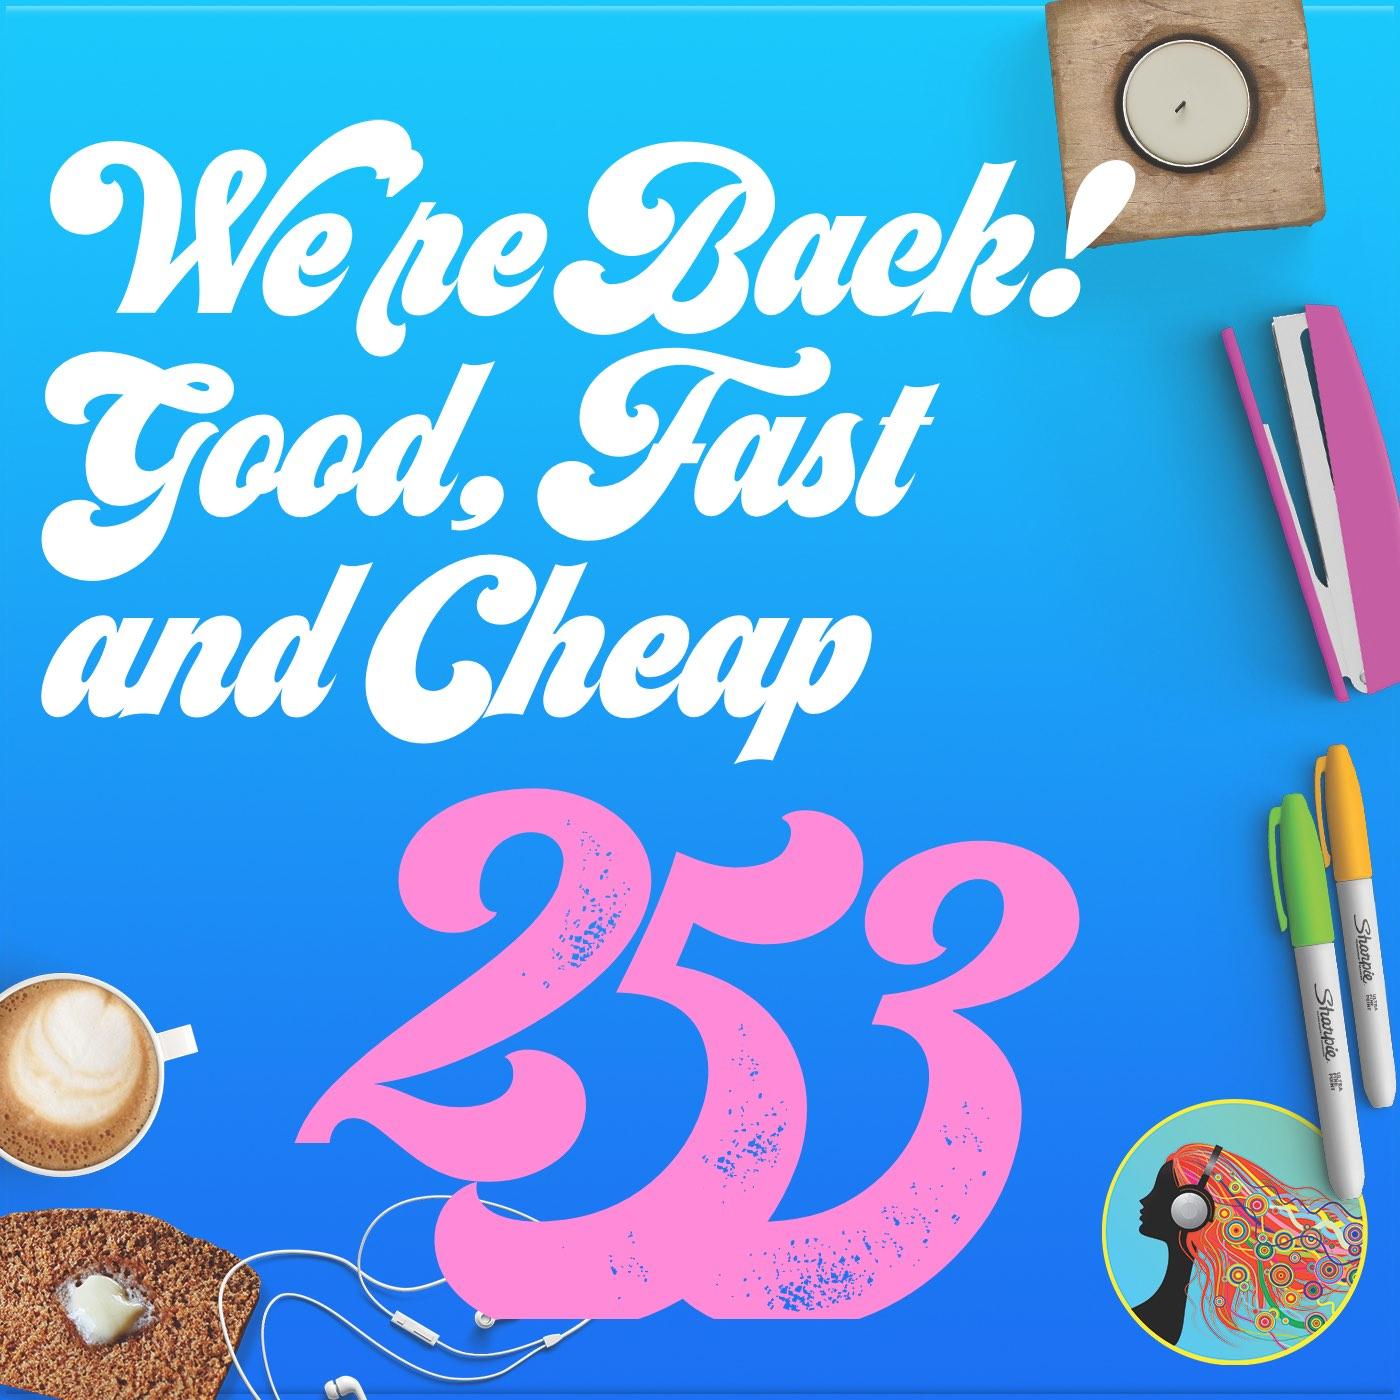 253 We’re Back! Good, Fast and Cheap